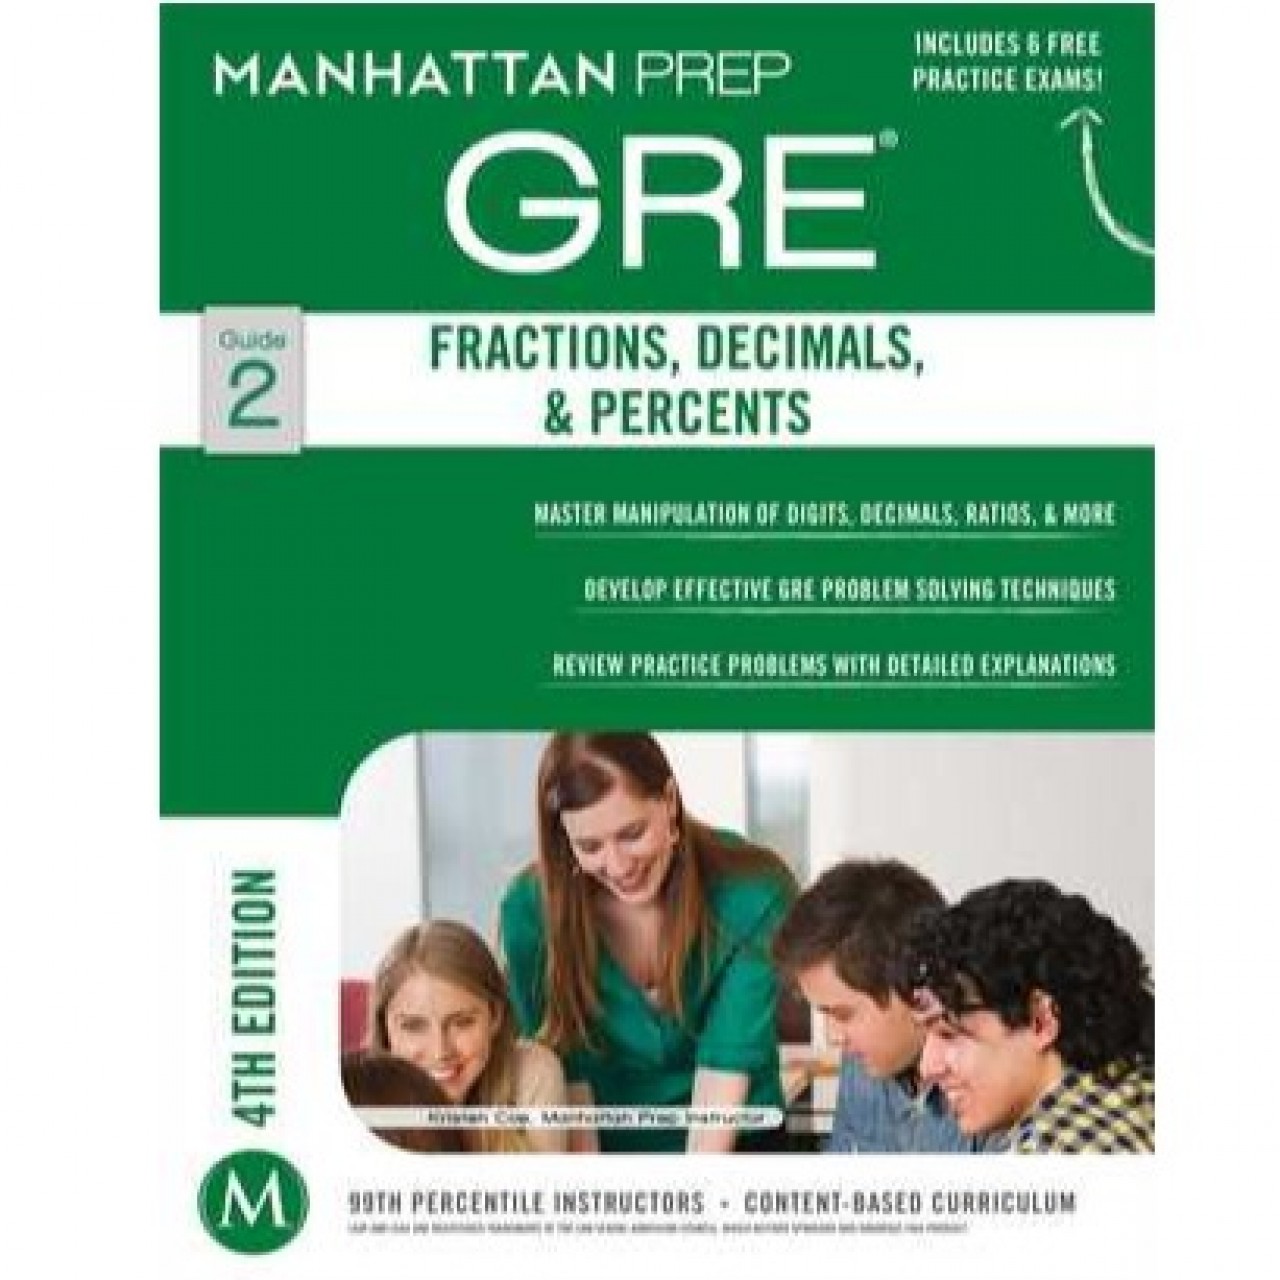 Manhattan Prep GRE Fractions,Decimals & Percents Guide 2 (4th Edition) By Kristen Coe-Paperback 2014